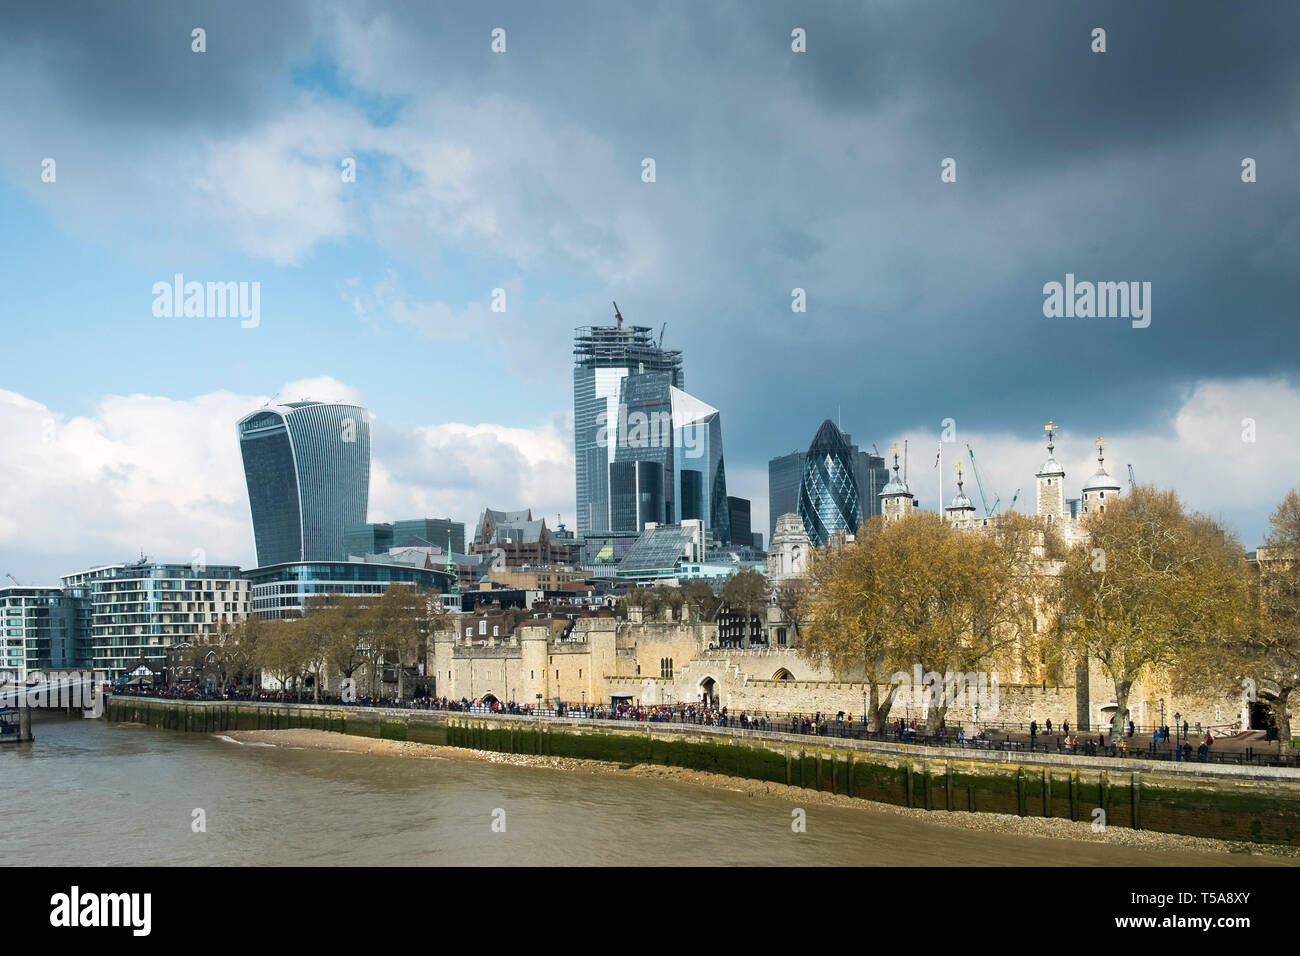 The Tower of London and iconic high rise office buildings in the background. Stock Photo